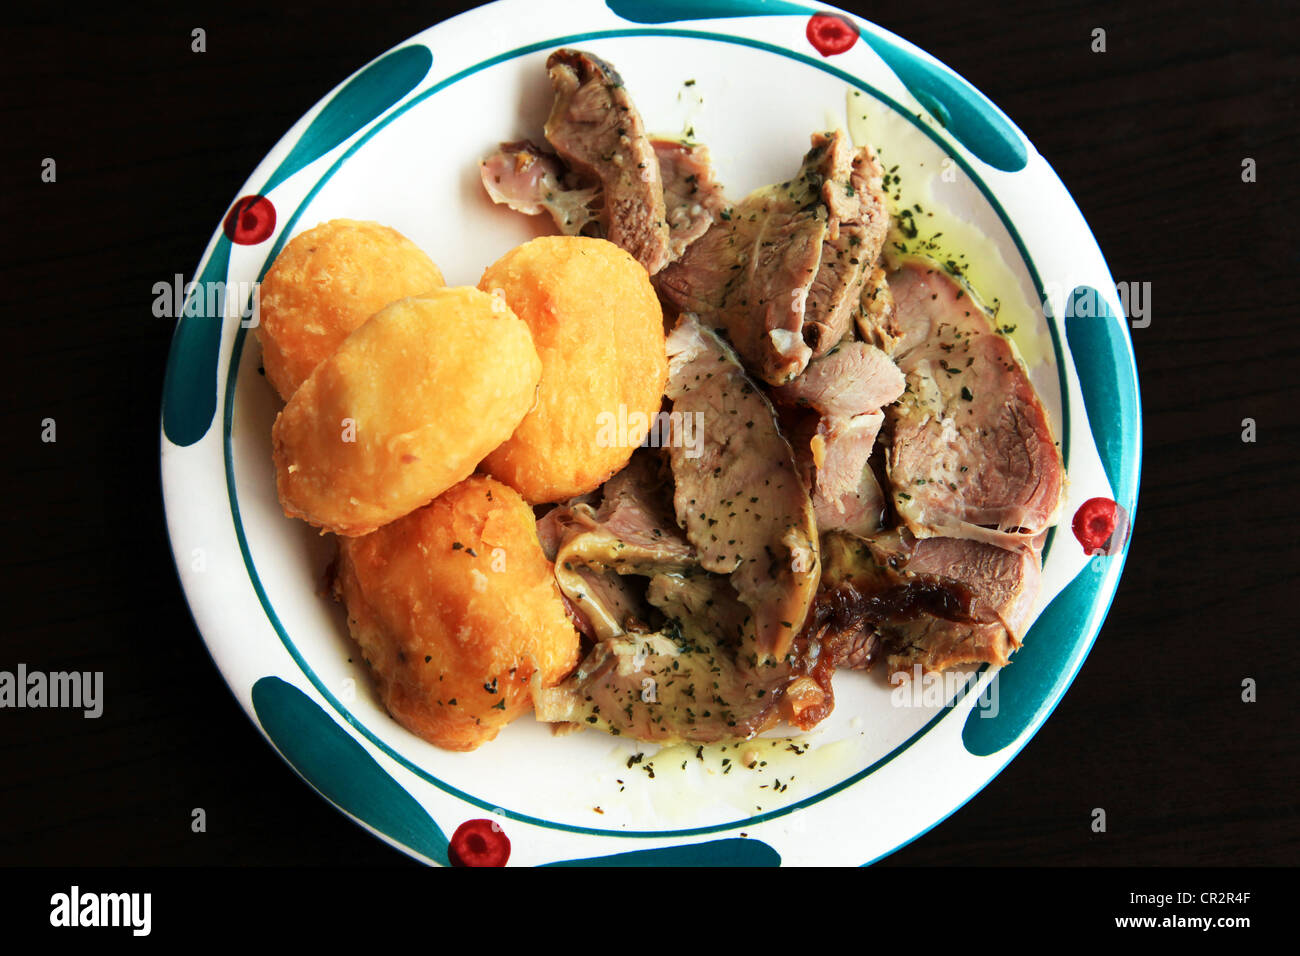 Potato with the cut meat lamb on a plate Stock Photo